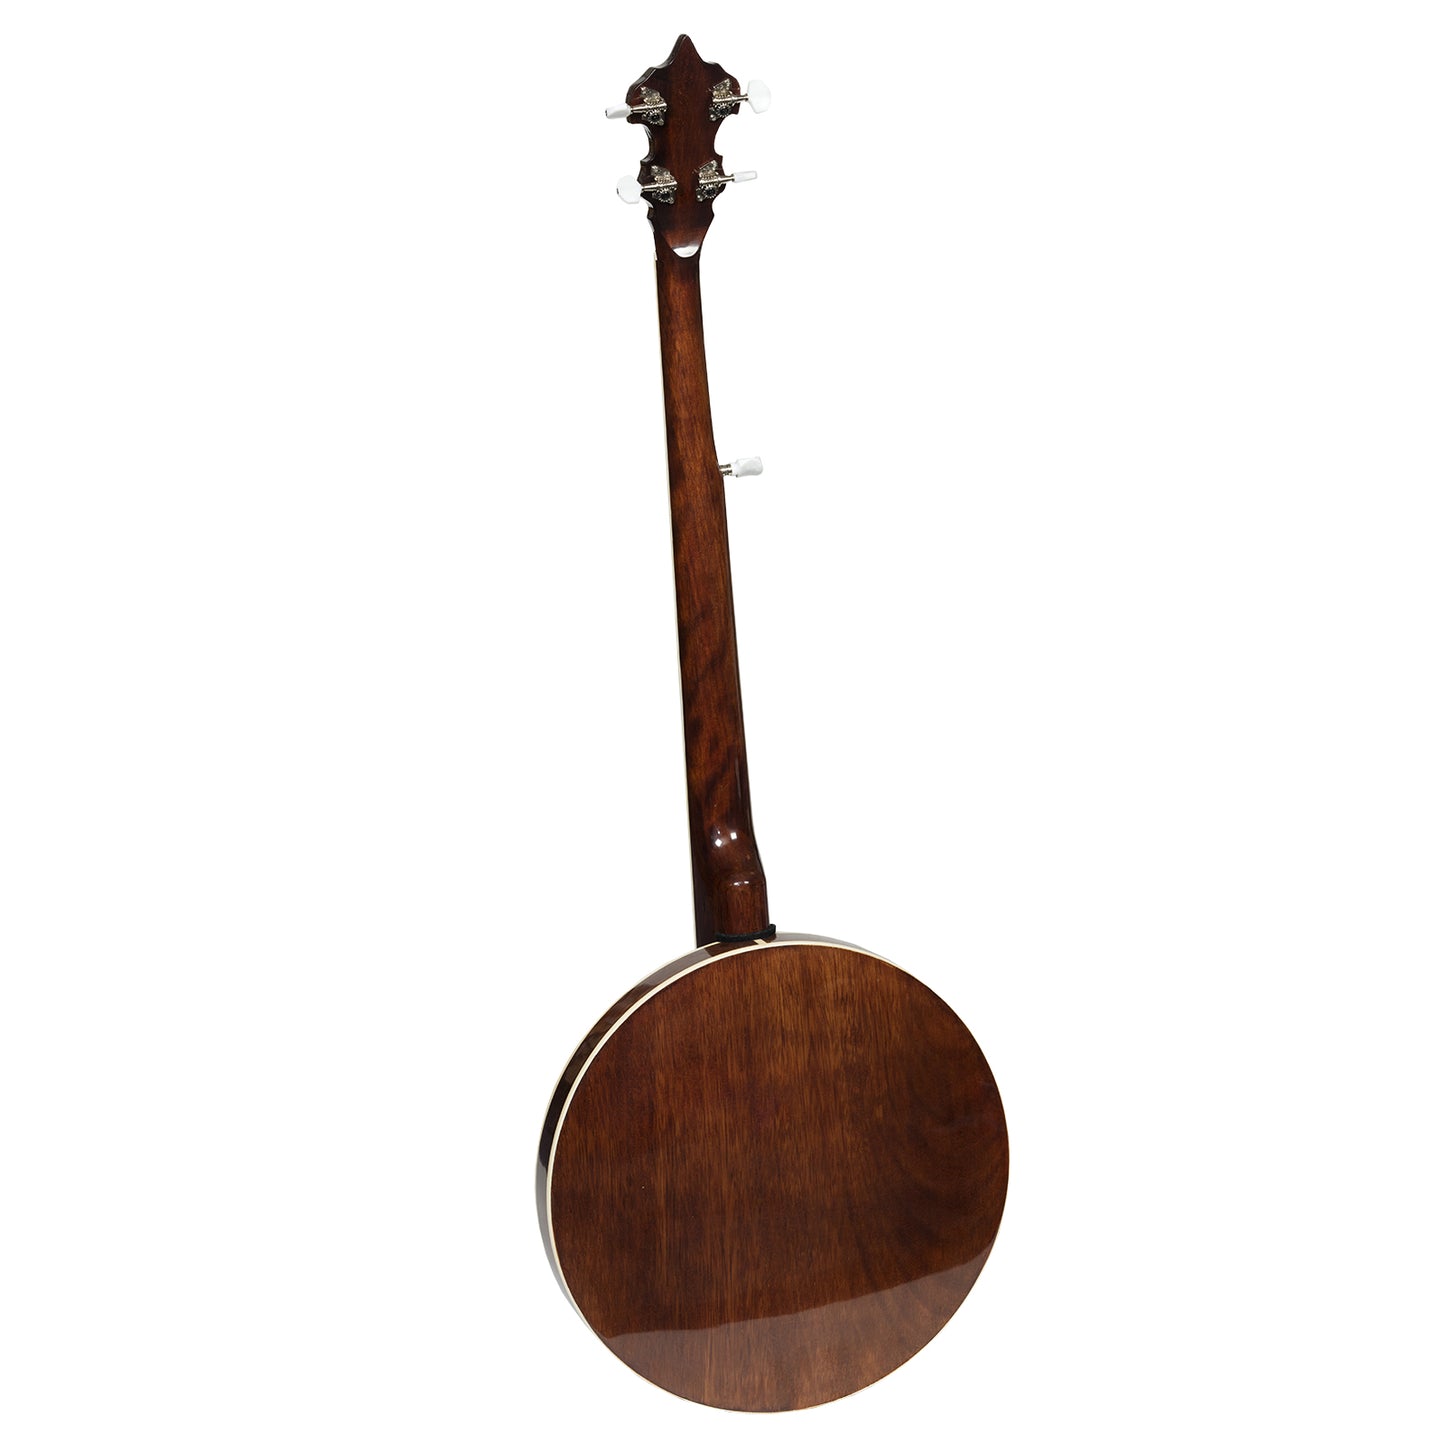 HEARTLAND 5 STRING IRISH BANJO 24 BRACKET WITH CLOSED SOLID BACK AND GEARED 5TH TUNER